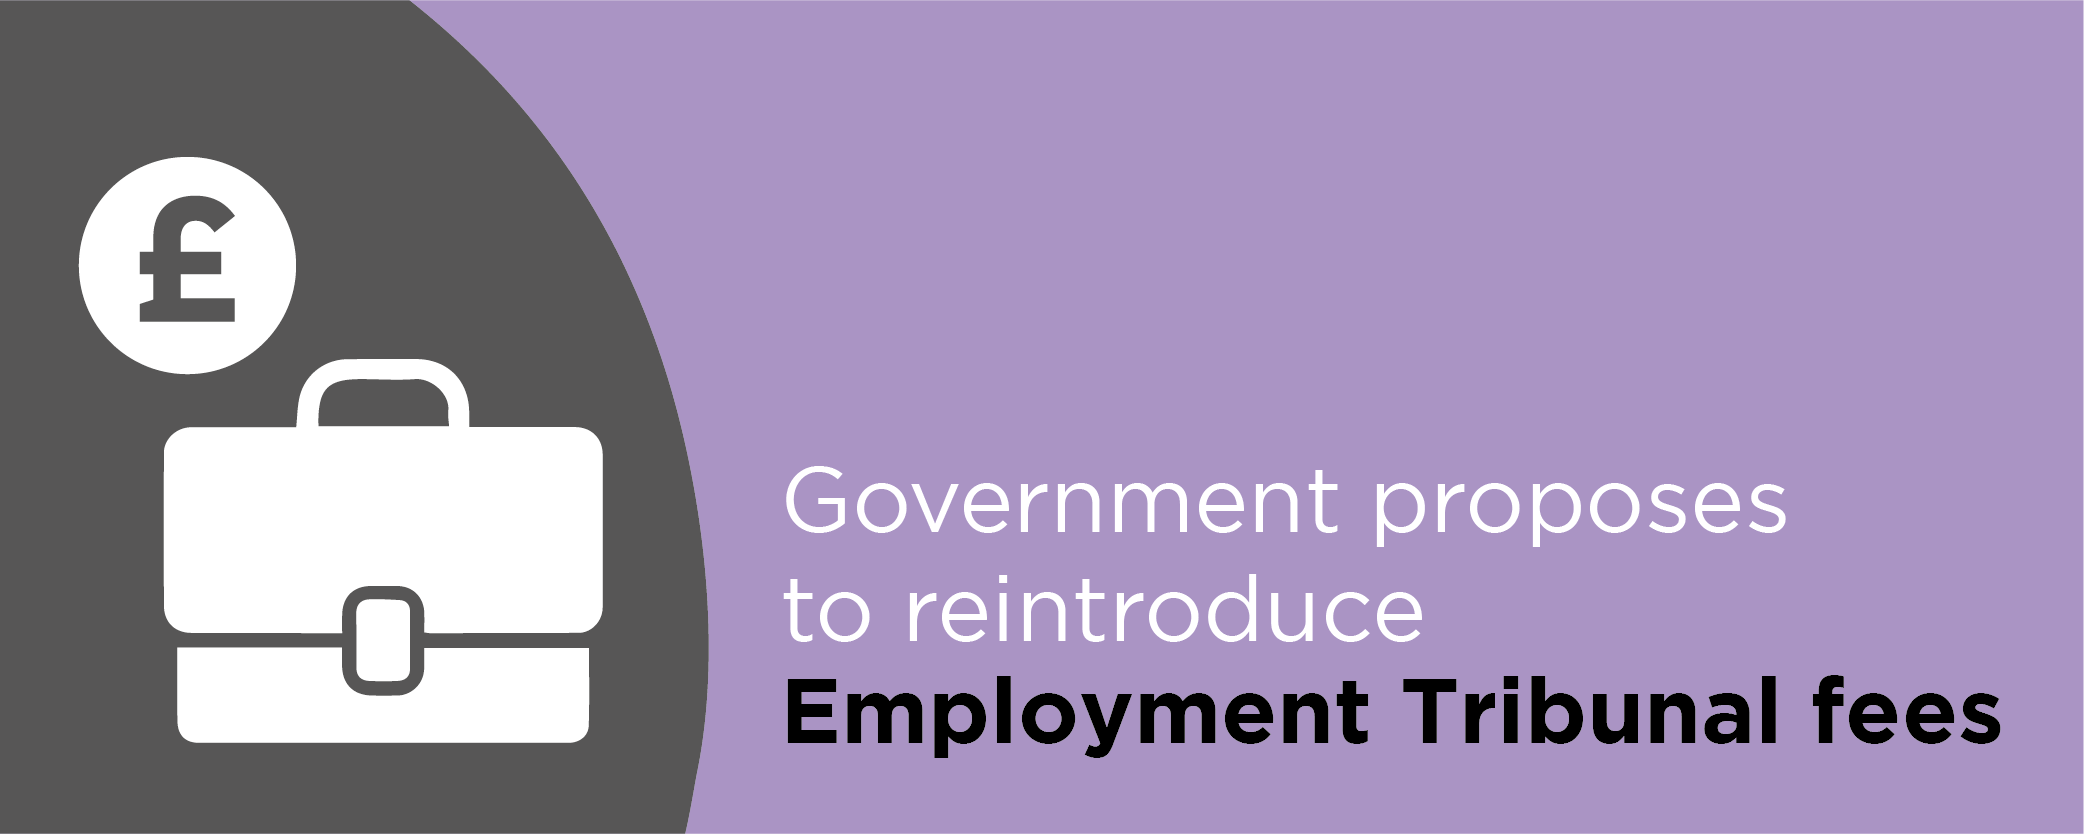 Government proposes to reintroduce Employment Tribunal fees